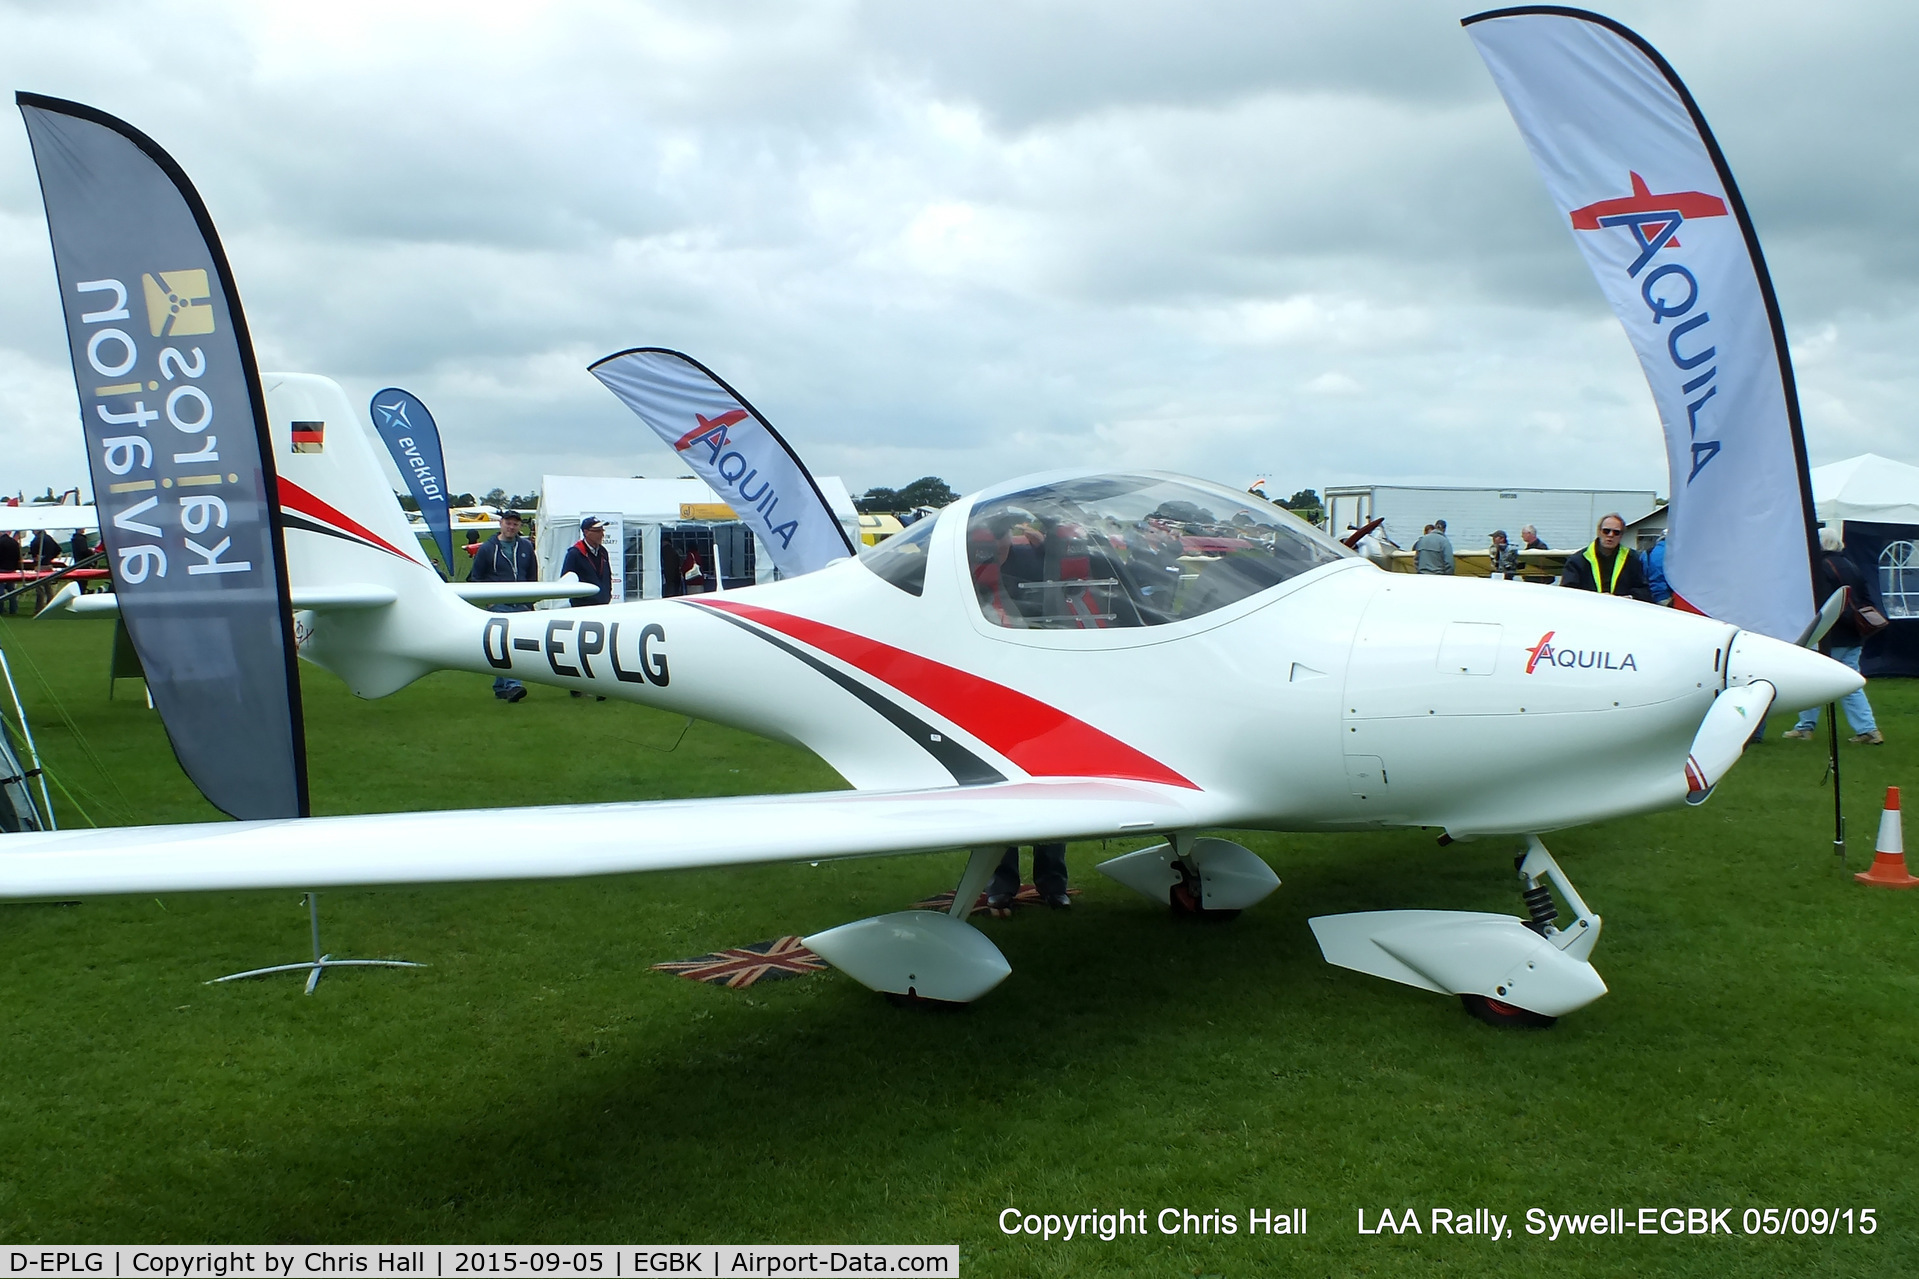 D-EPLG, 2014 Aquila A211 C/N AT01-100C-315, at the LAA Rally 2015, Sywell